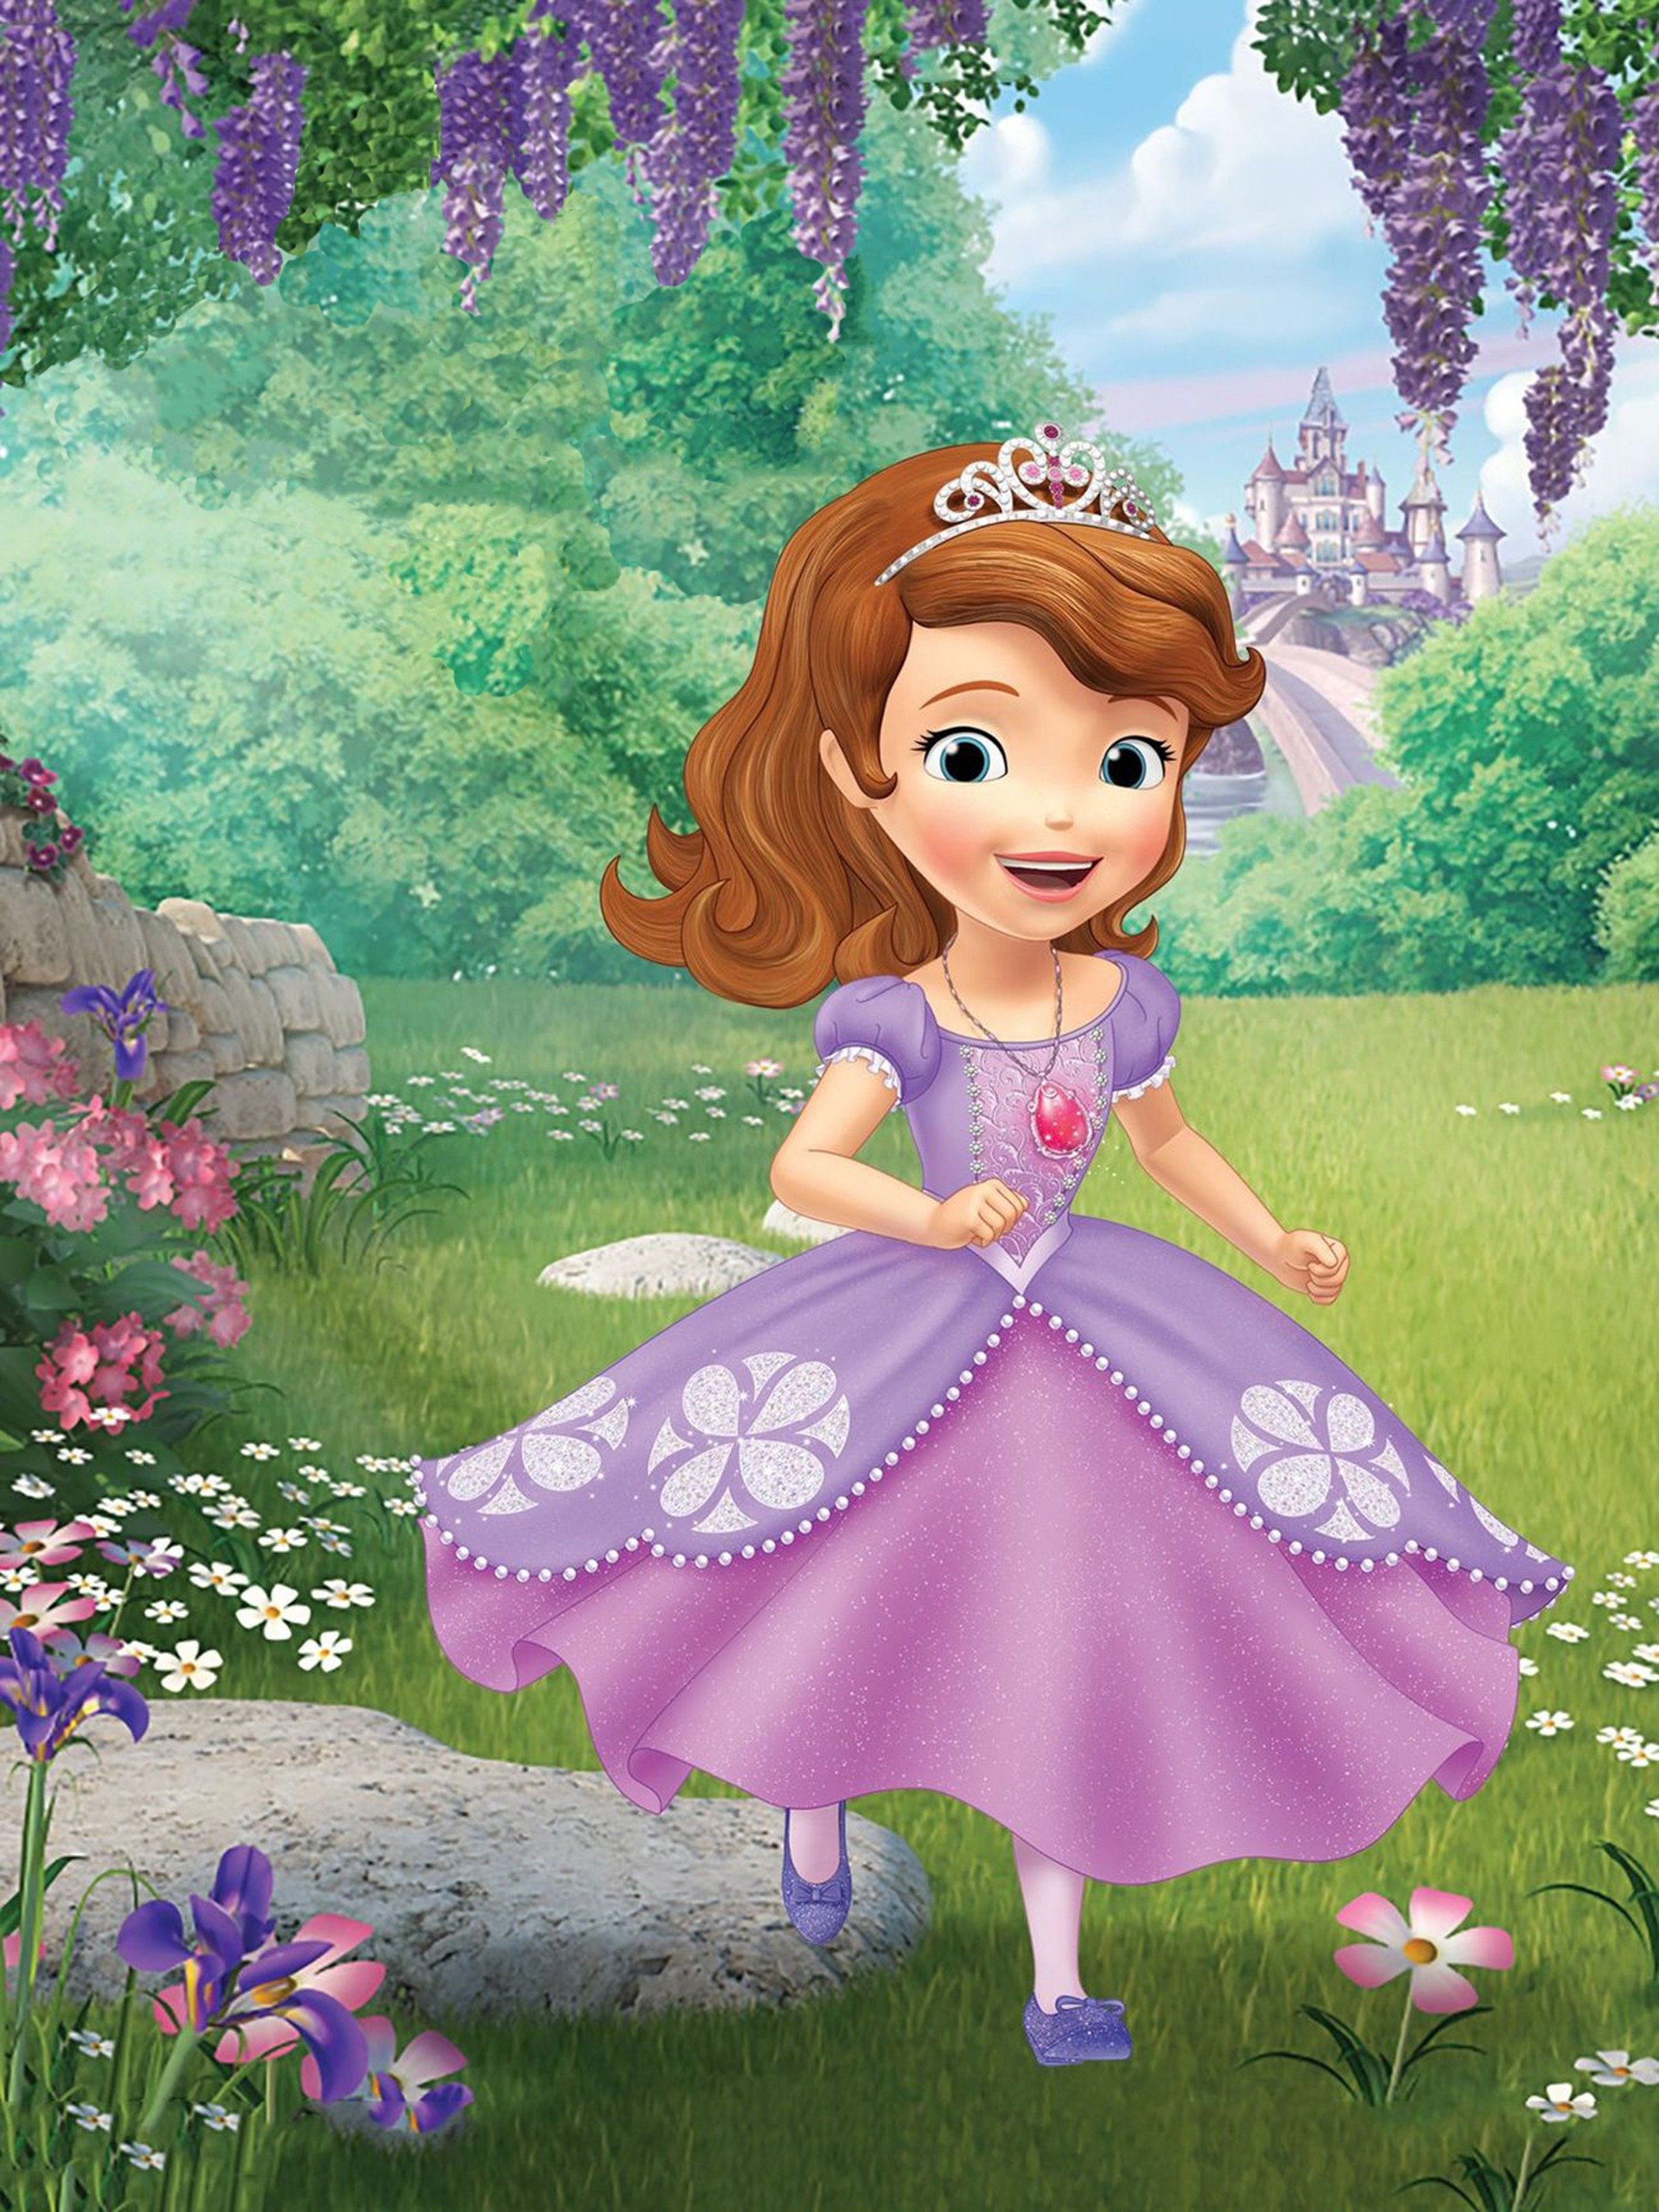 the new sofia the first